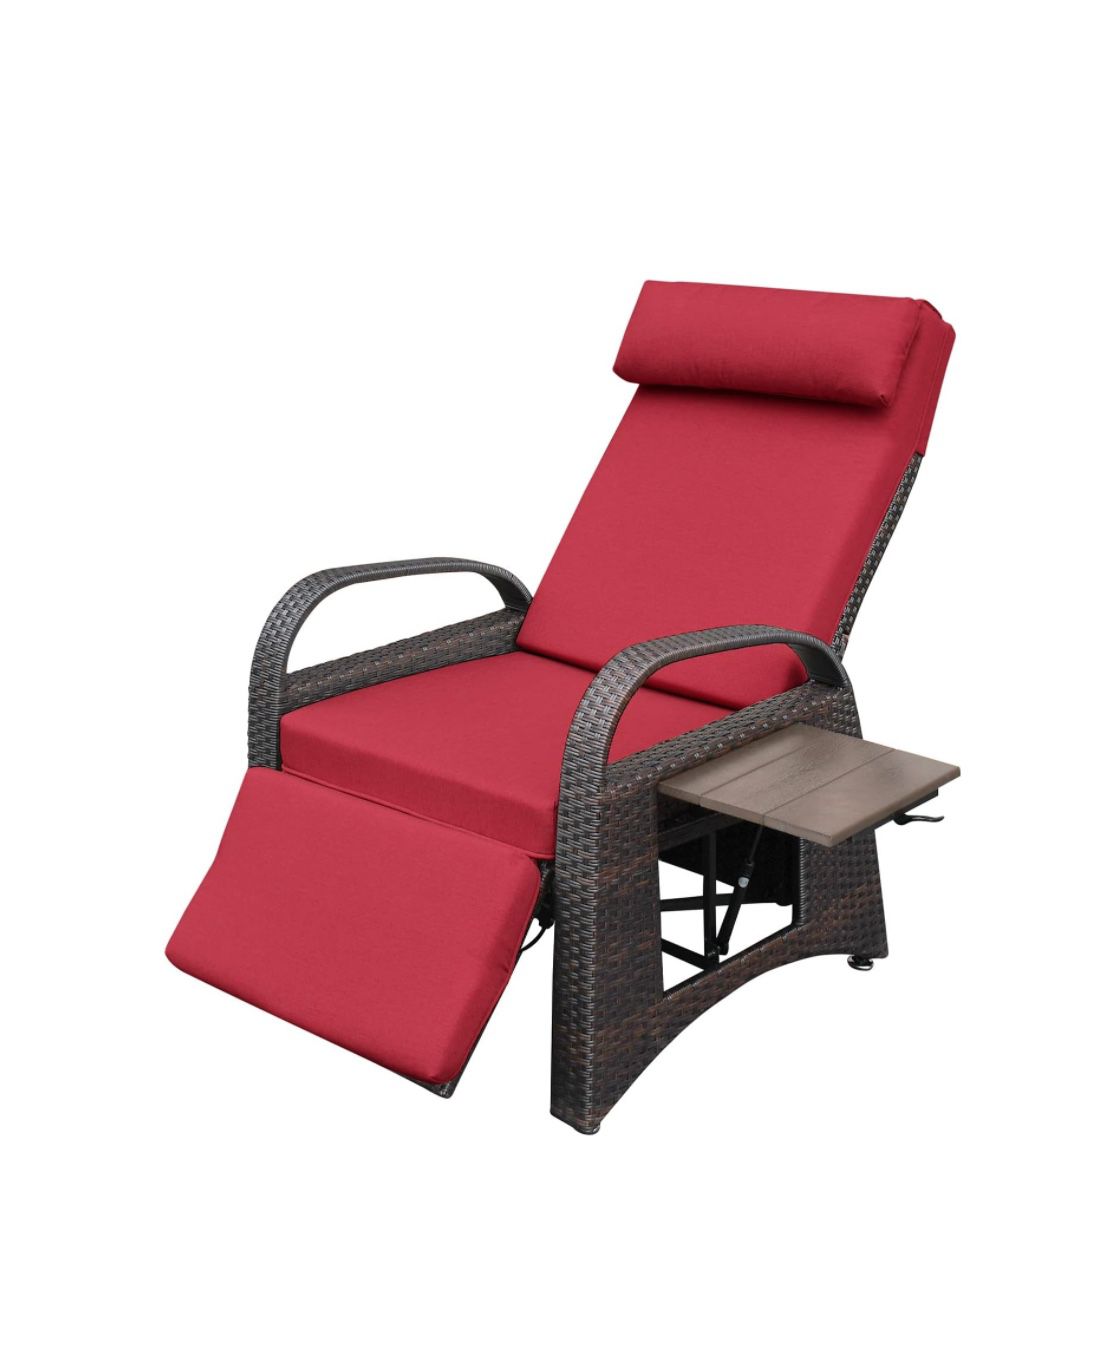 Outdoor Recliner Chair,PE Wicker Adjustable Reclining Lounge Chair and Removable Soft Cushion, with Modern Armchair and Ergonomic for Home, Sunbathing